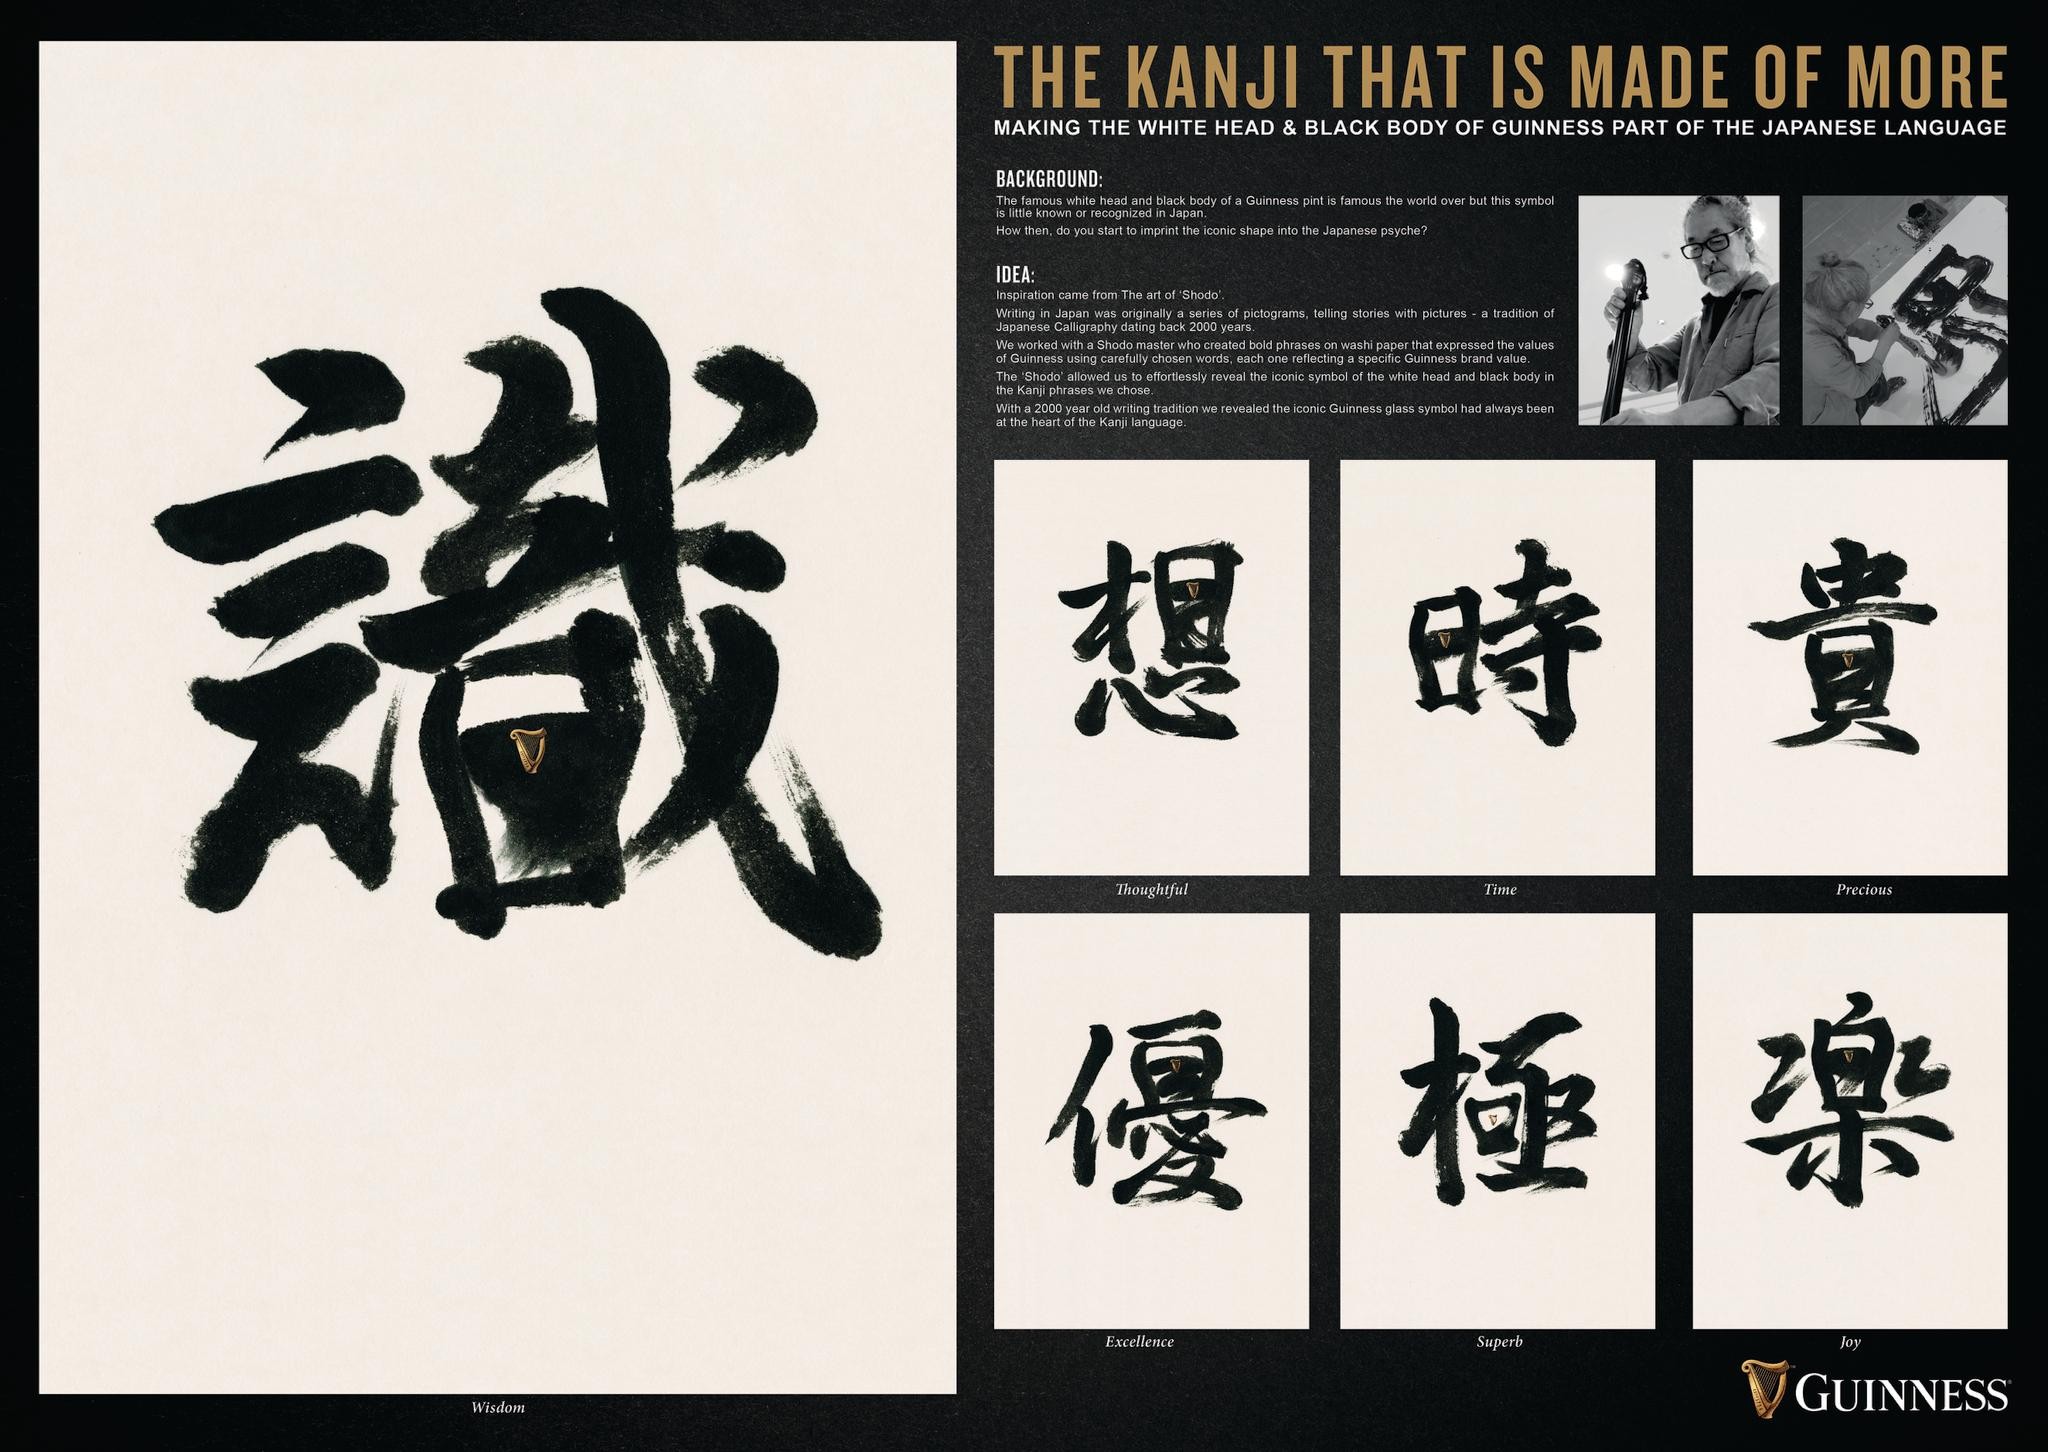 THE KANJI THAT IS MADE OF MORE				